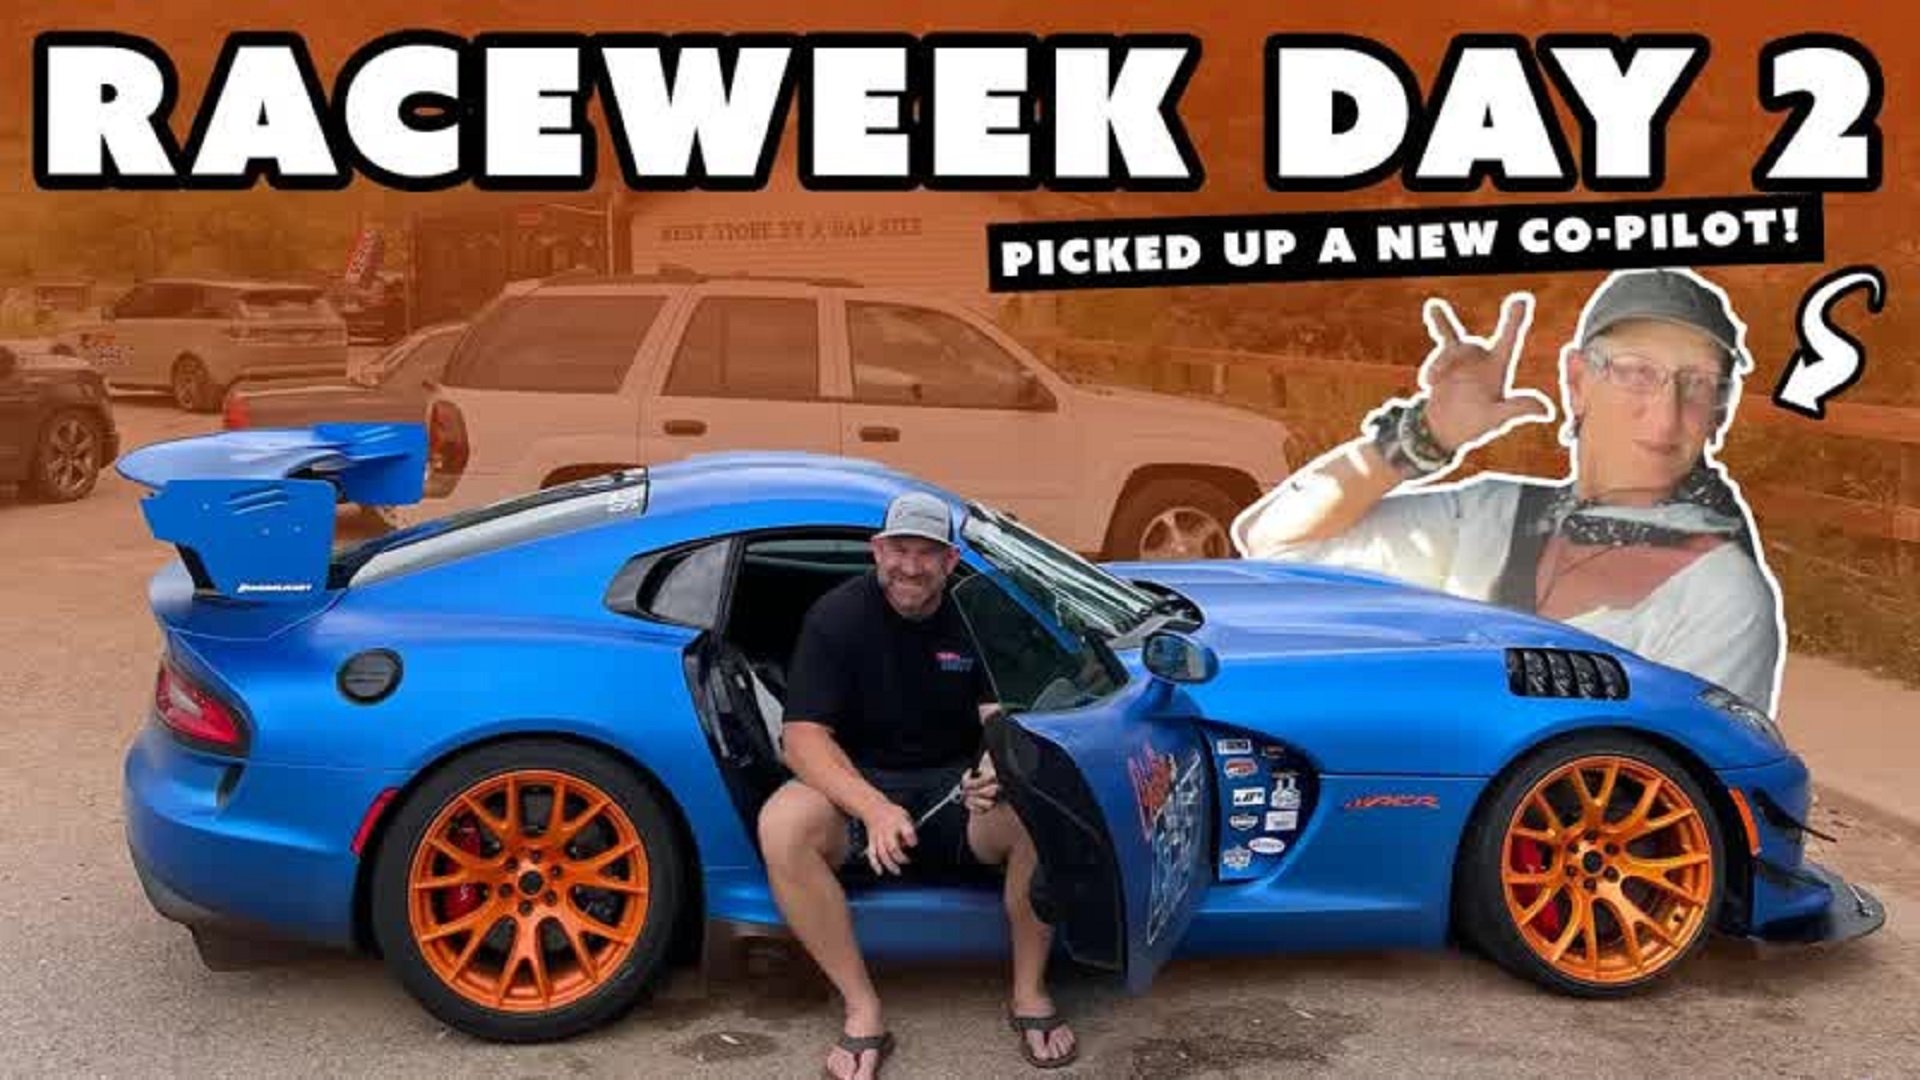 I GAVE my Viper ACR to my Nephew Cleetus & Crew, Flew a Plane & Picked up a Hitch Hiker! RMRW Day 2